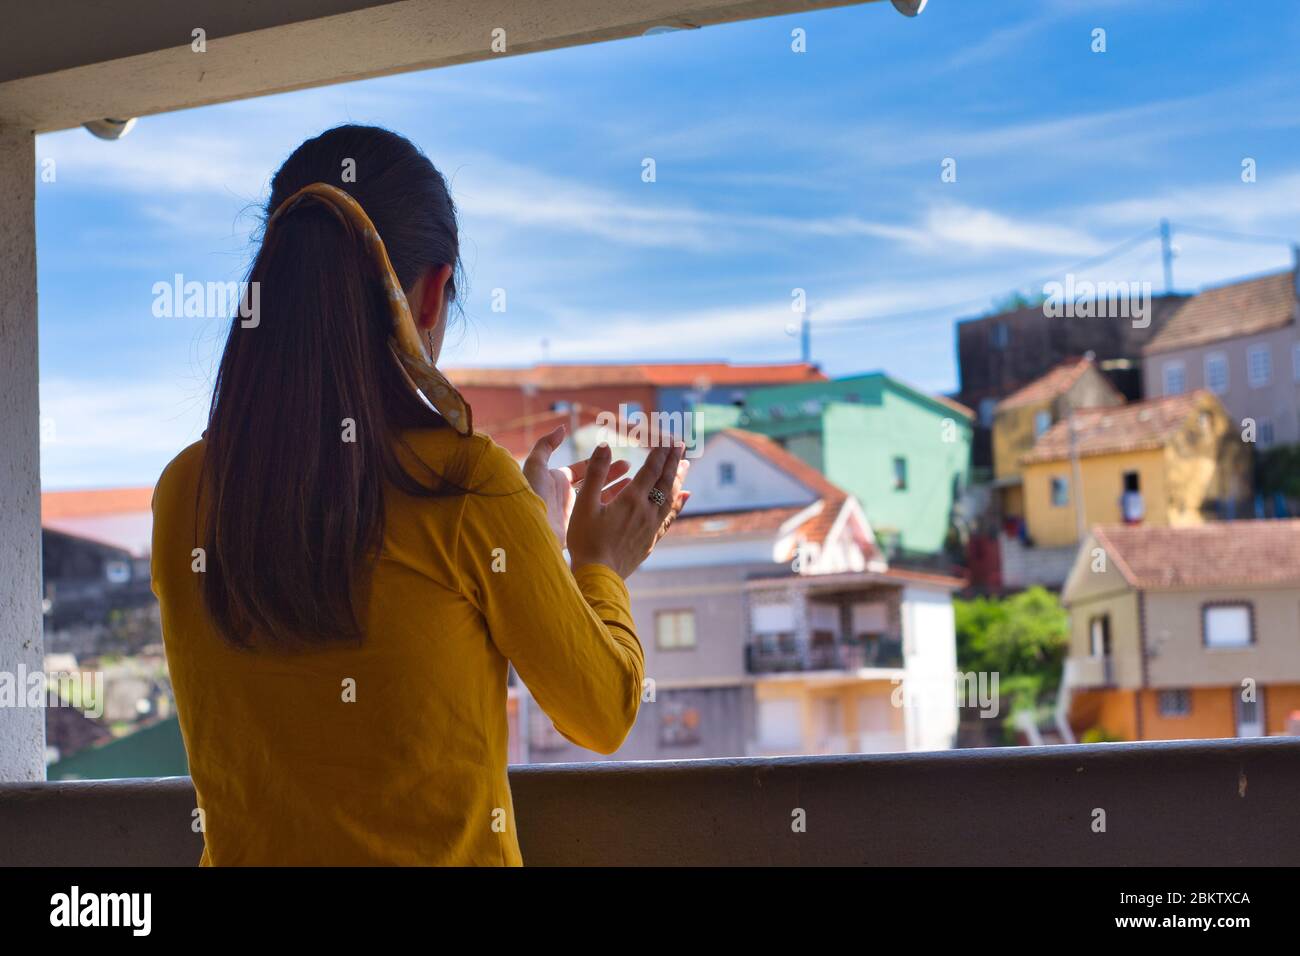 Young woman clapping her hands on the balcony to showi gratitude to all healthcare workers during the coronavirus outbreak. Lots of colorful houses. Stock Photo